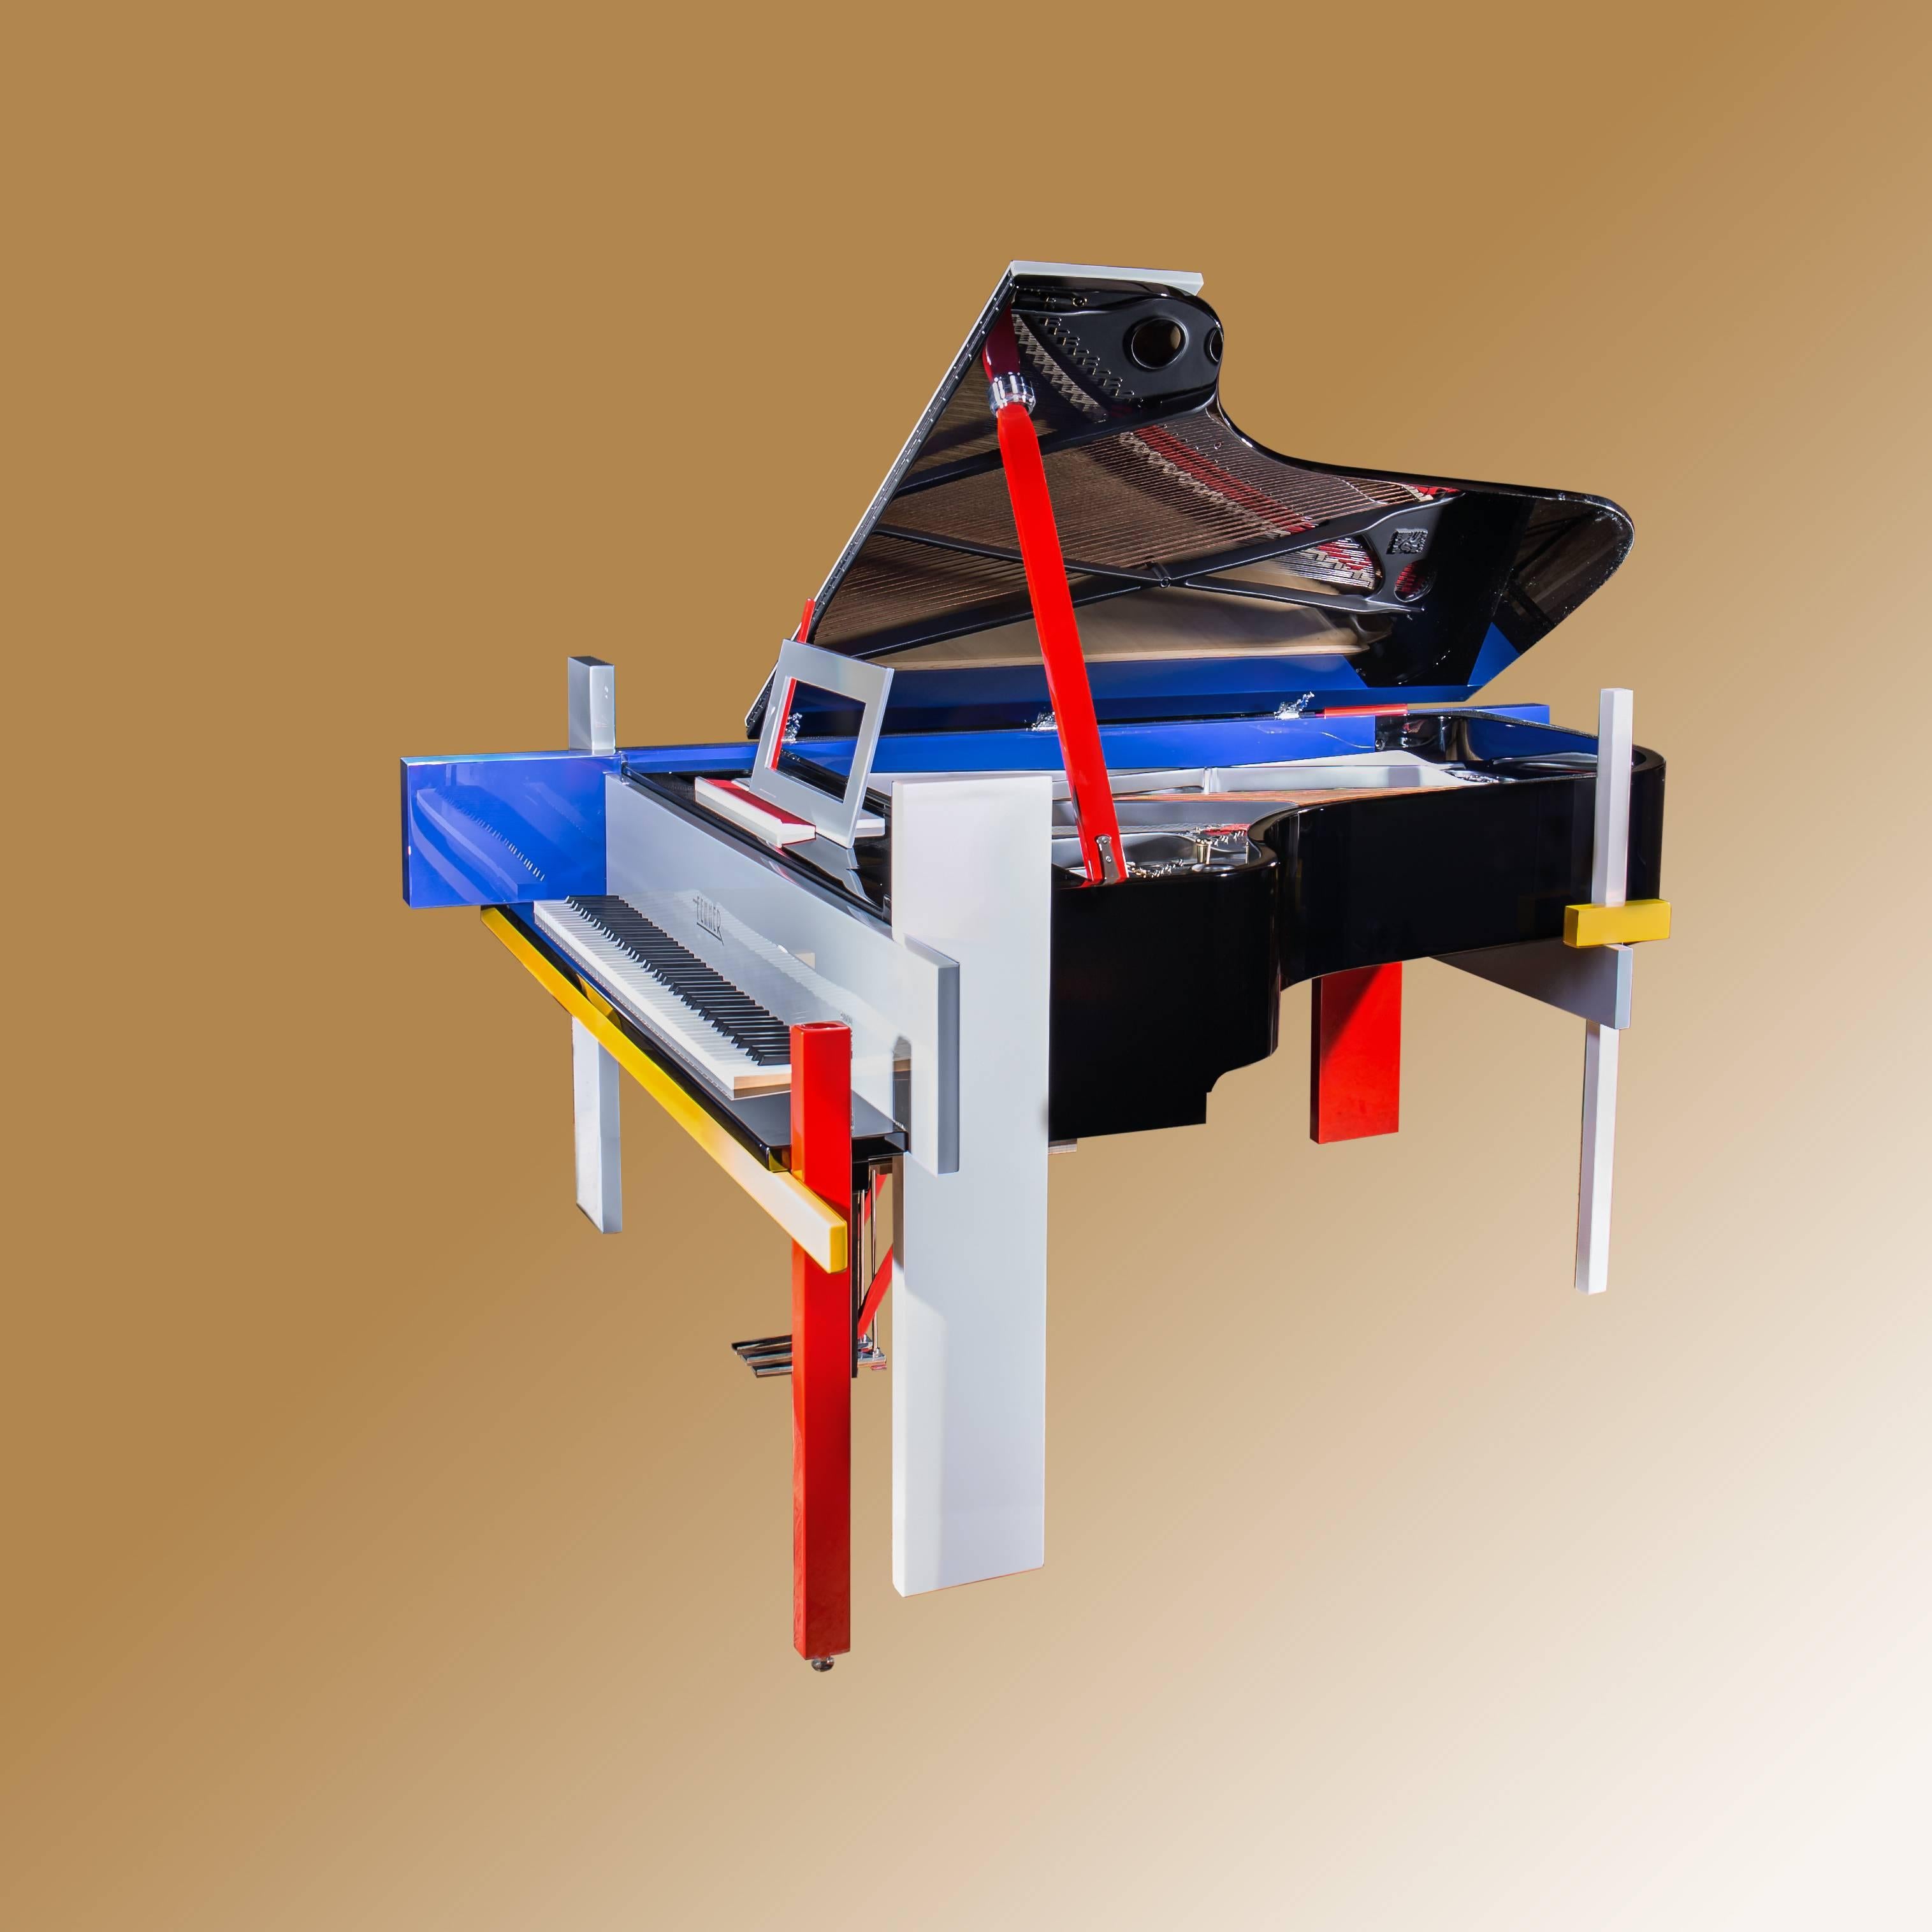 One of a kind Modern Art grand piano designed by the New York architect Alexander Gorlin for a design Contest. Has been built new in the leading German Piano workshop Pianova Klavierbau. The piano is the number 2 of 2 ever built. 

We looked